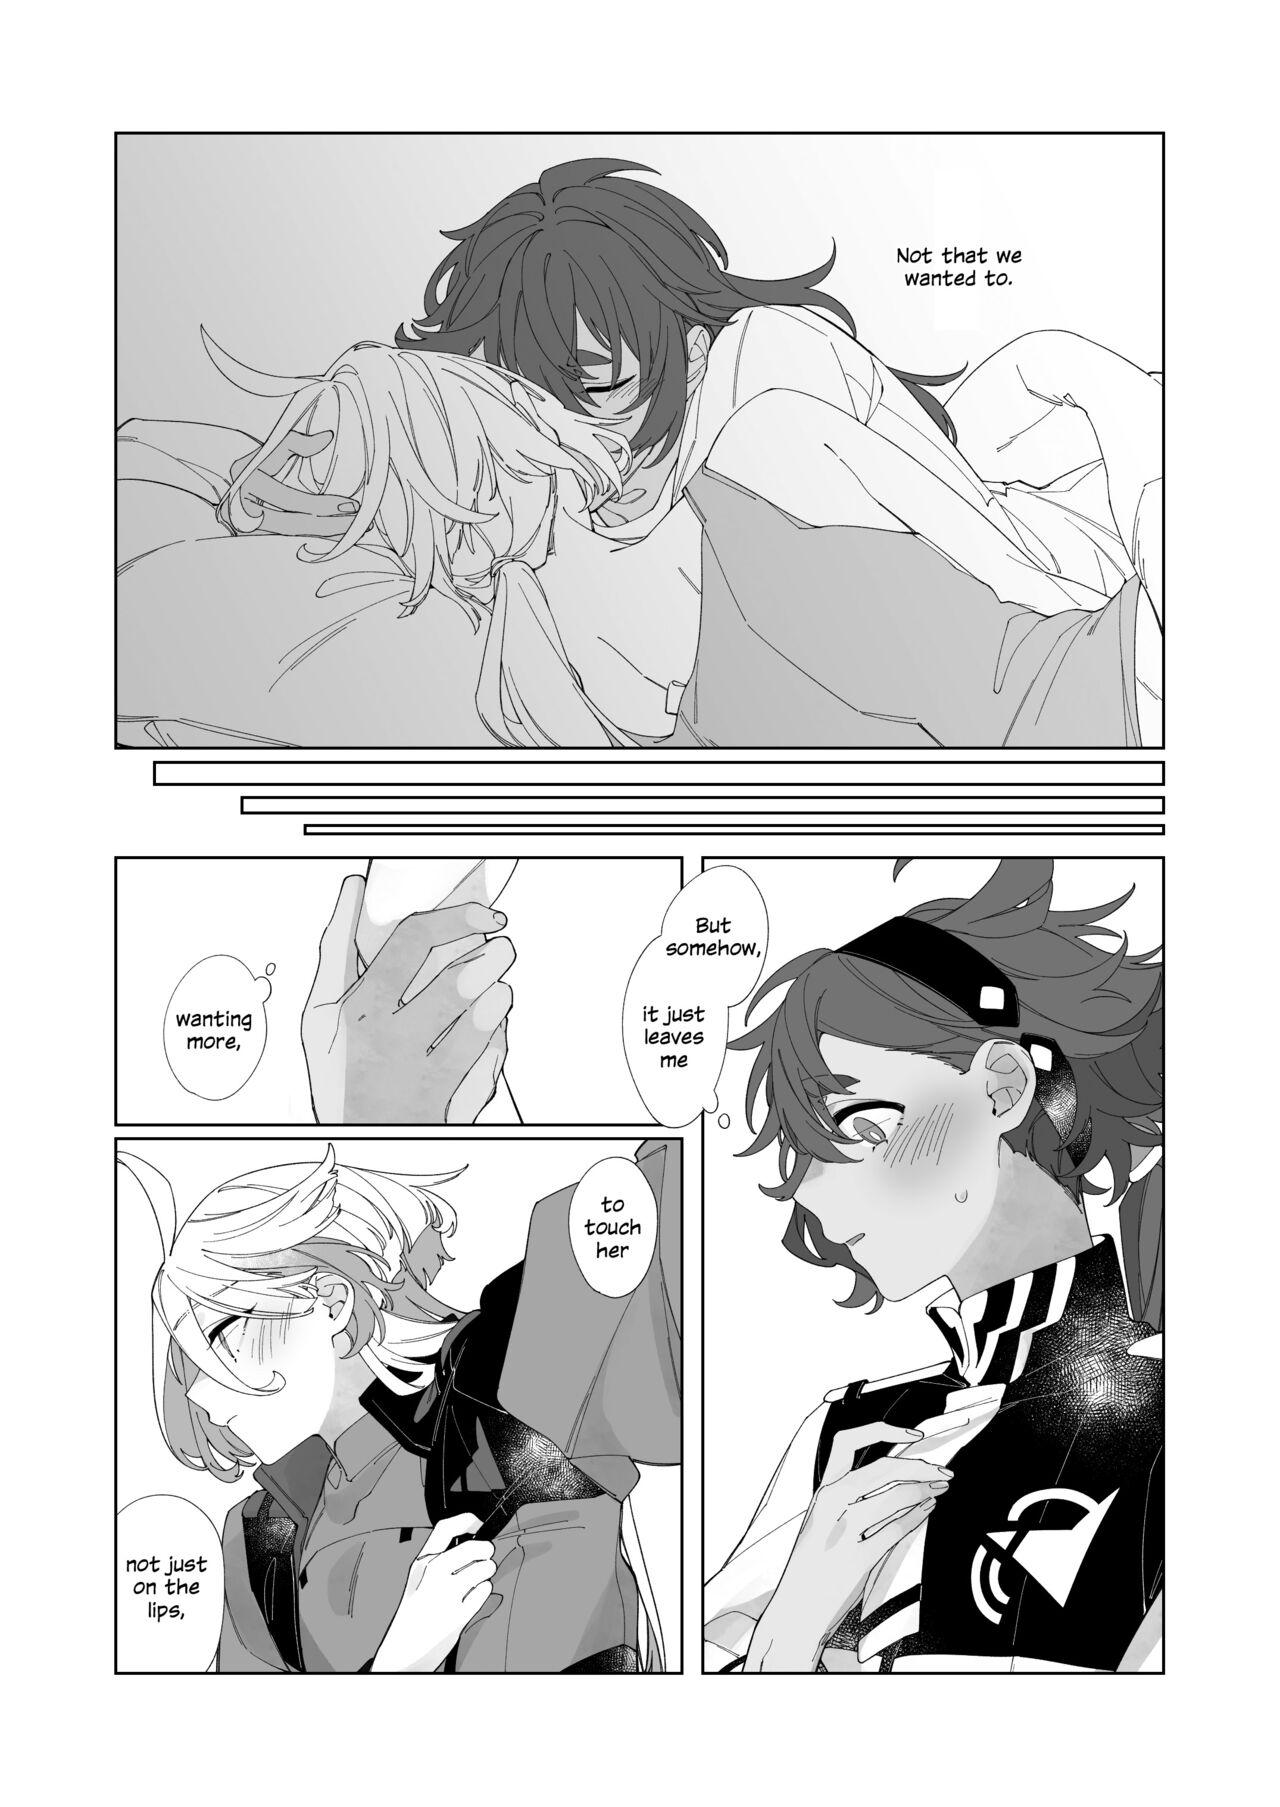 Couch Kiss no Ato Nani ga Shitai? | After Kissing, What Else Do You Want to Do? - Mobile suit gundam the witch from mercury Step - Page 9